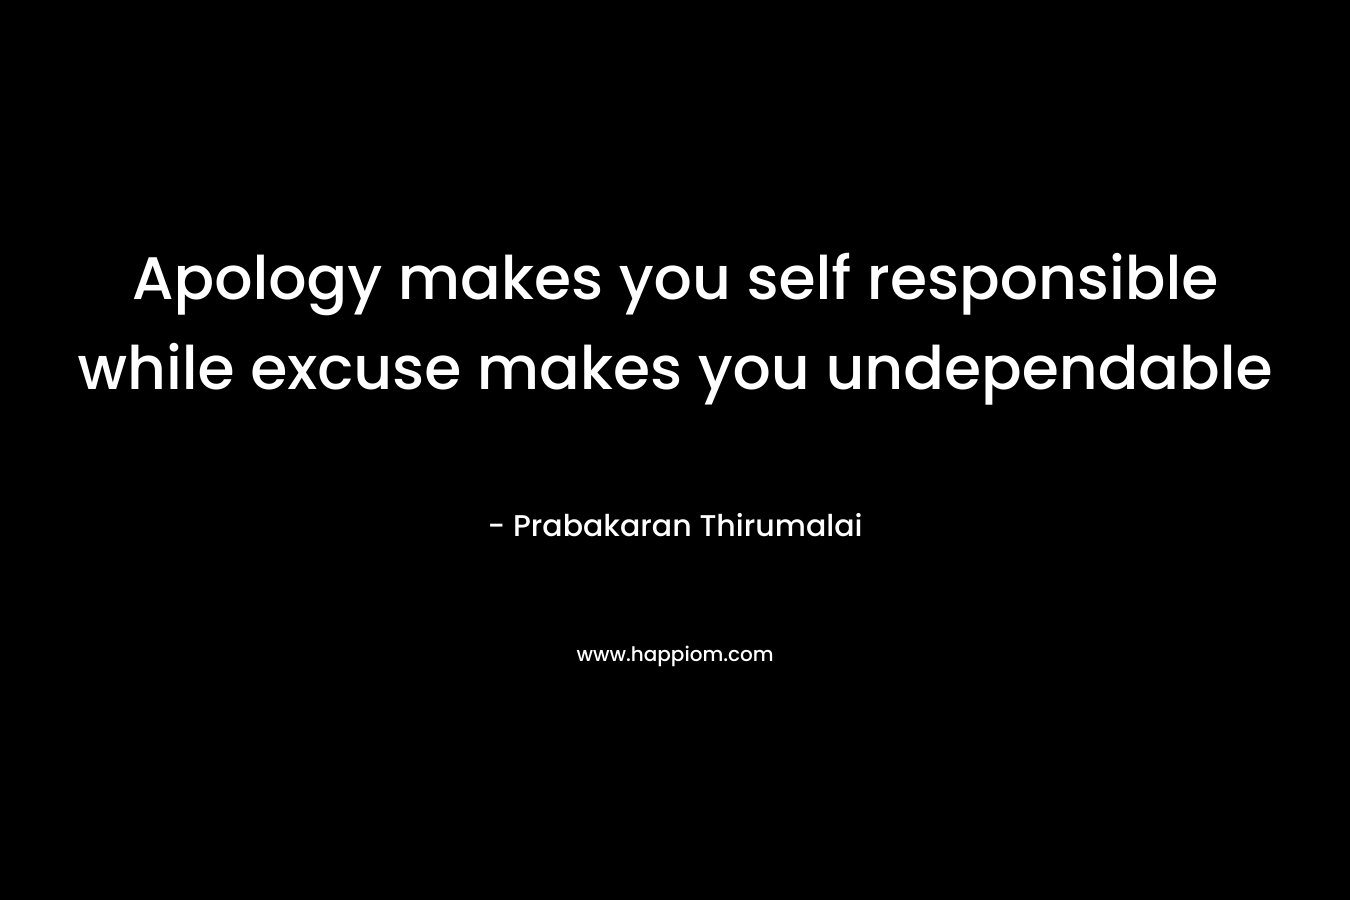 Apology makes you self responsible while excuse makes you undependable